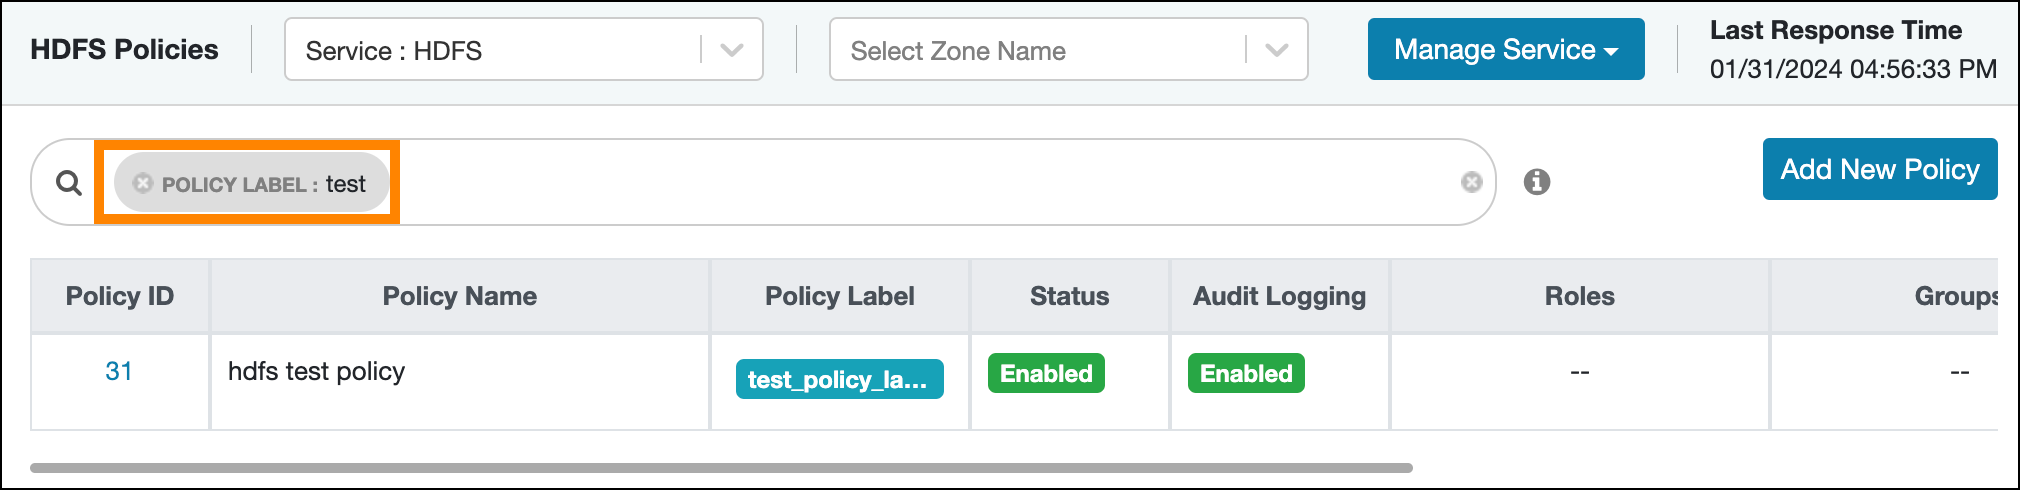 Filtering Resource-based policies for HDFS service by label